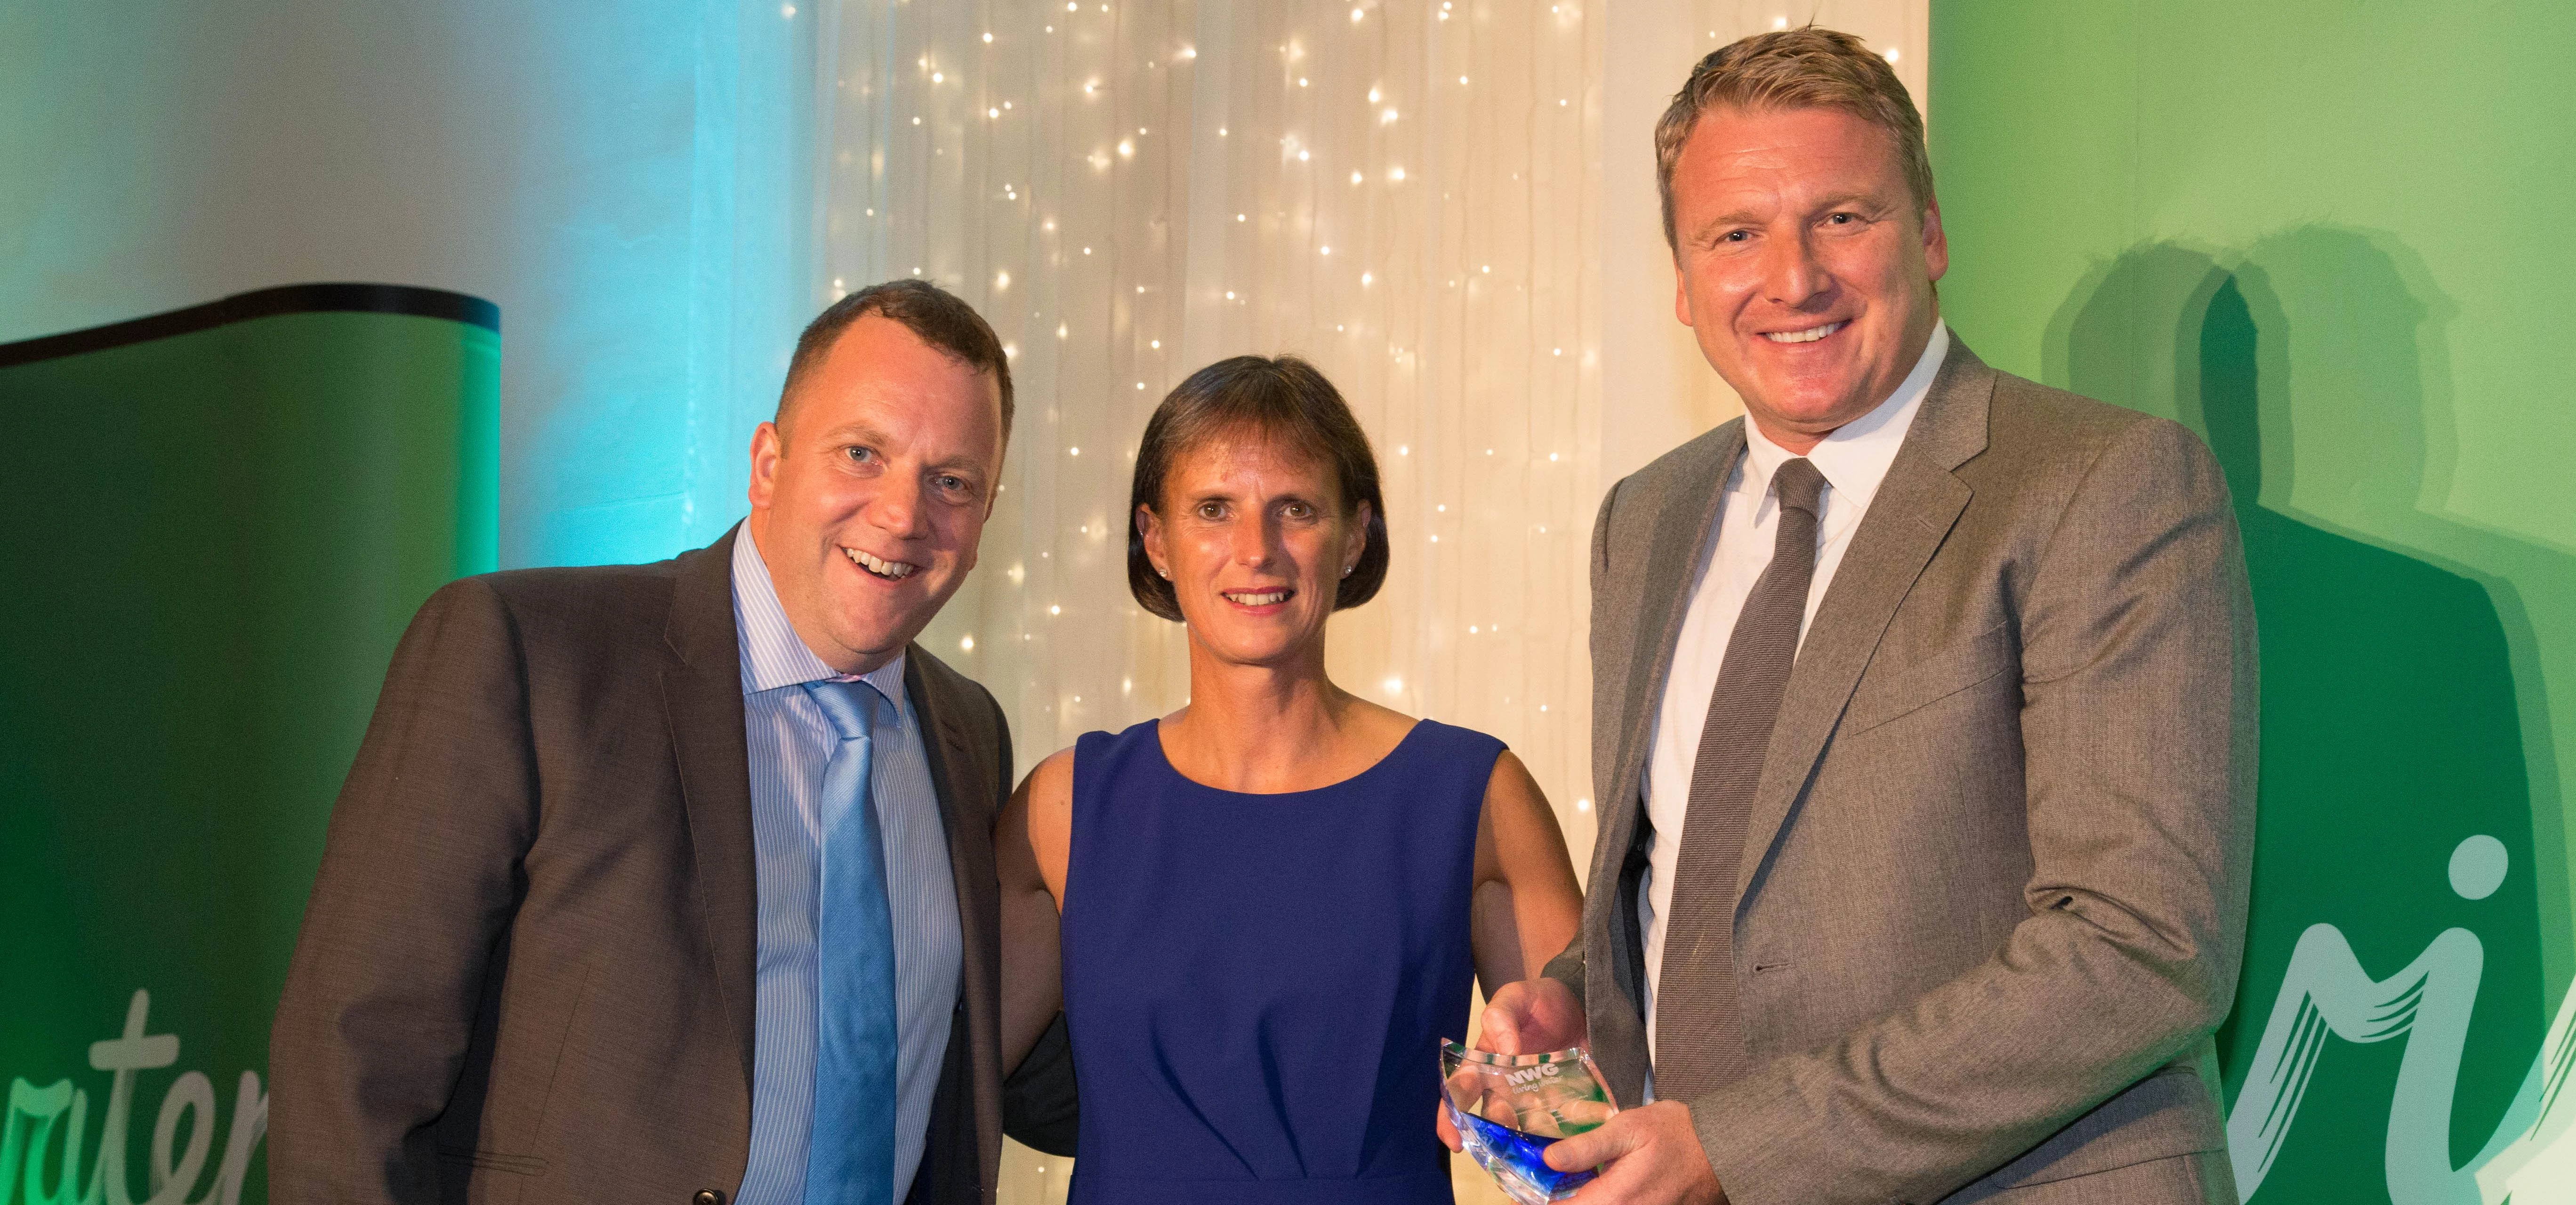 Synergi’s Justin Short (left) and Peter Joynson (right) receive the GEM award from Northumbrian Wate